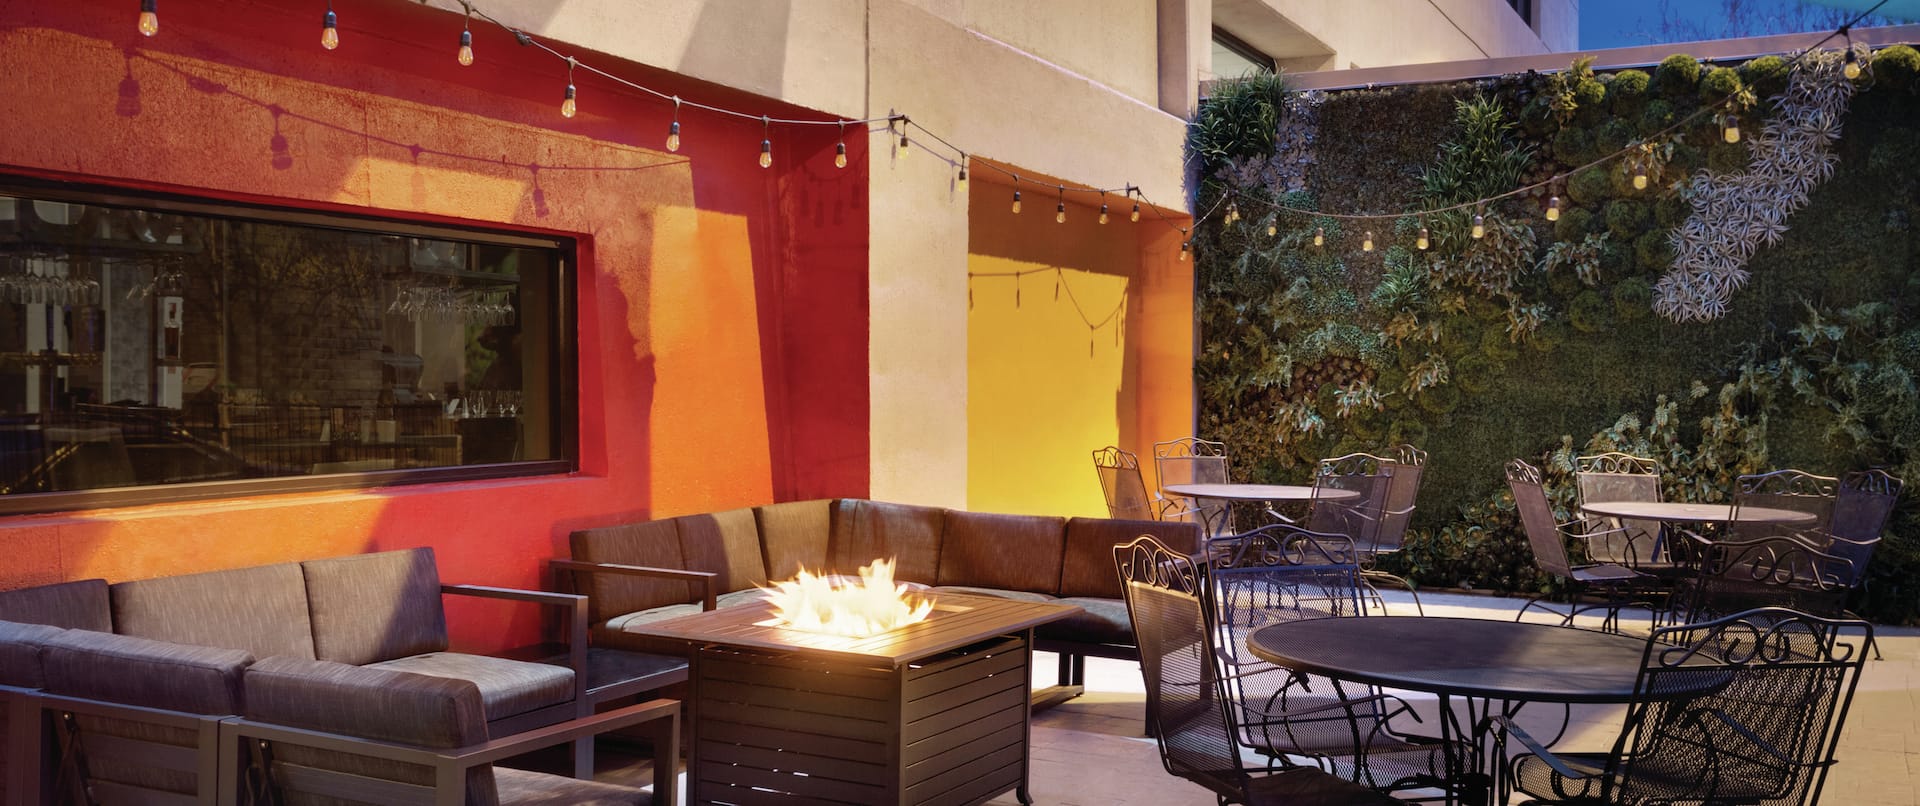 Outdoor Patio Seating Area with Sofas, Firepit, Chairs and Table at Dusk